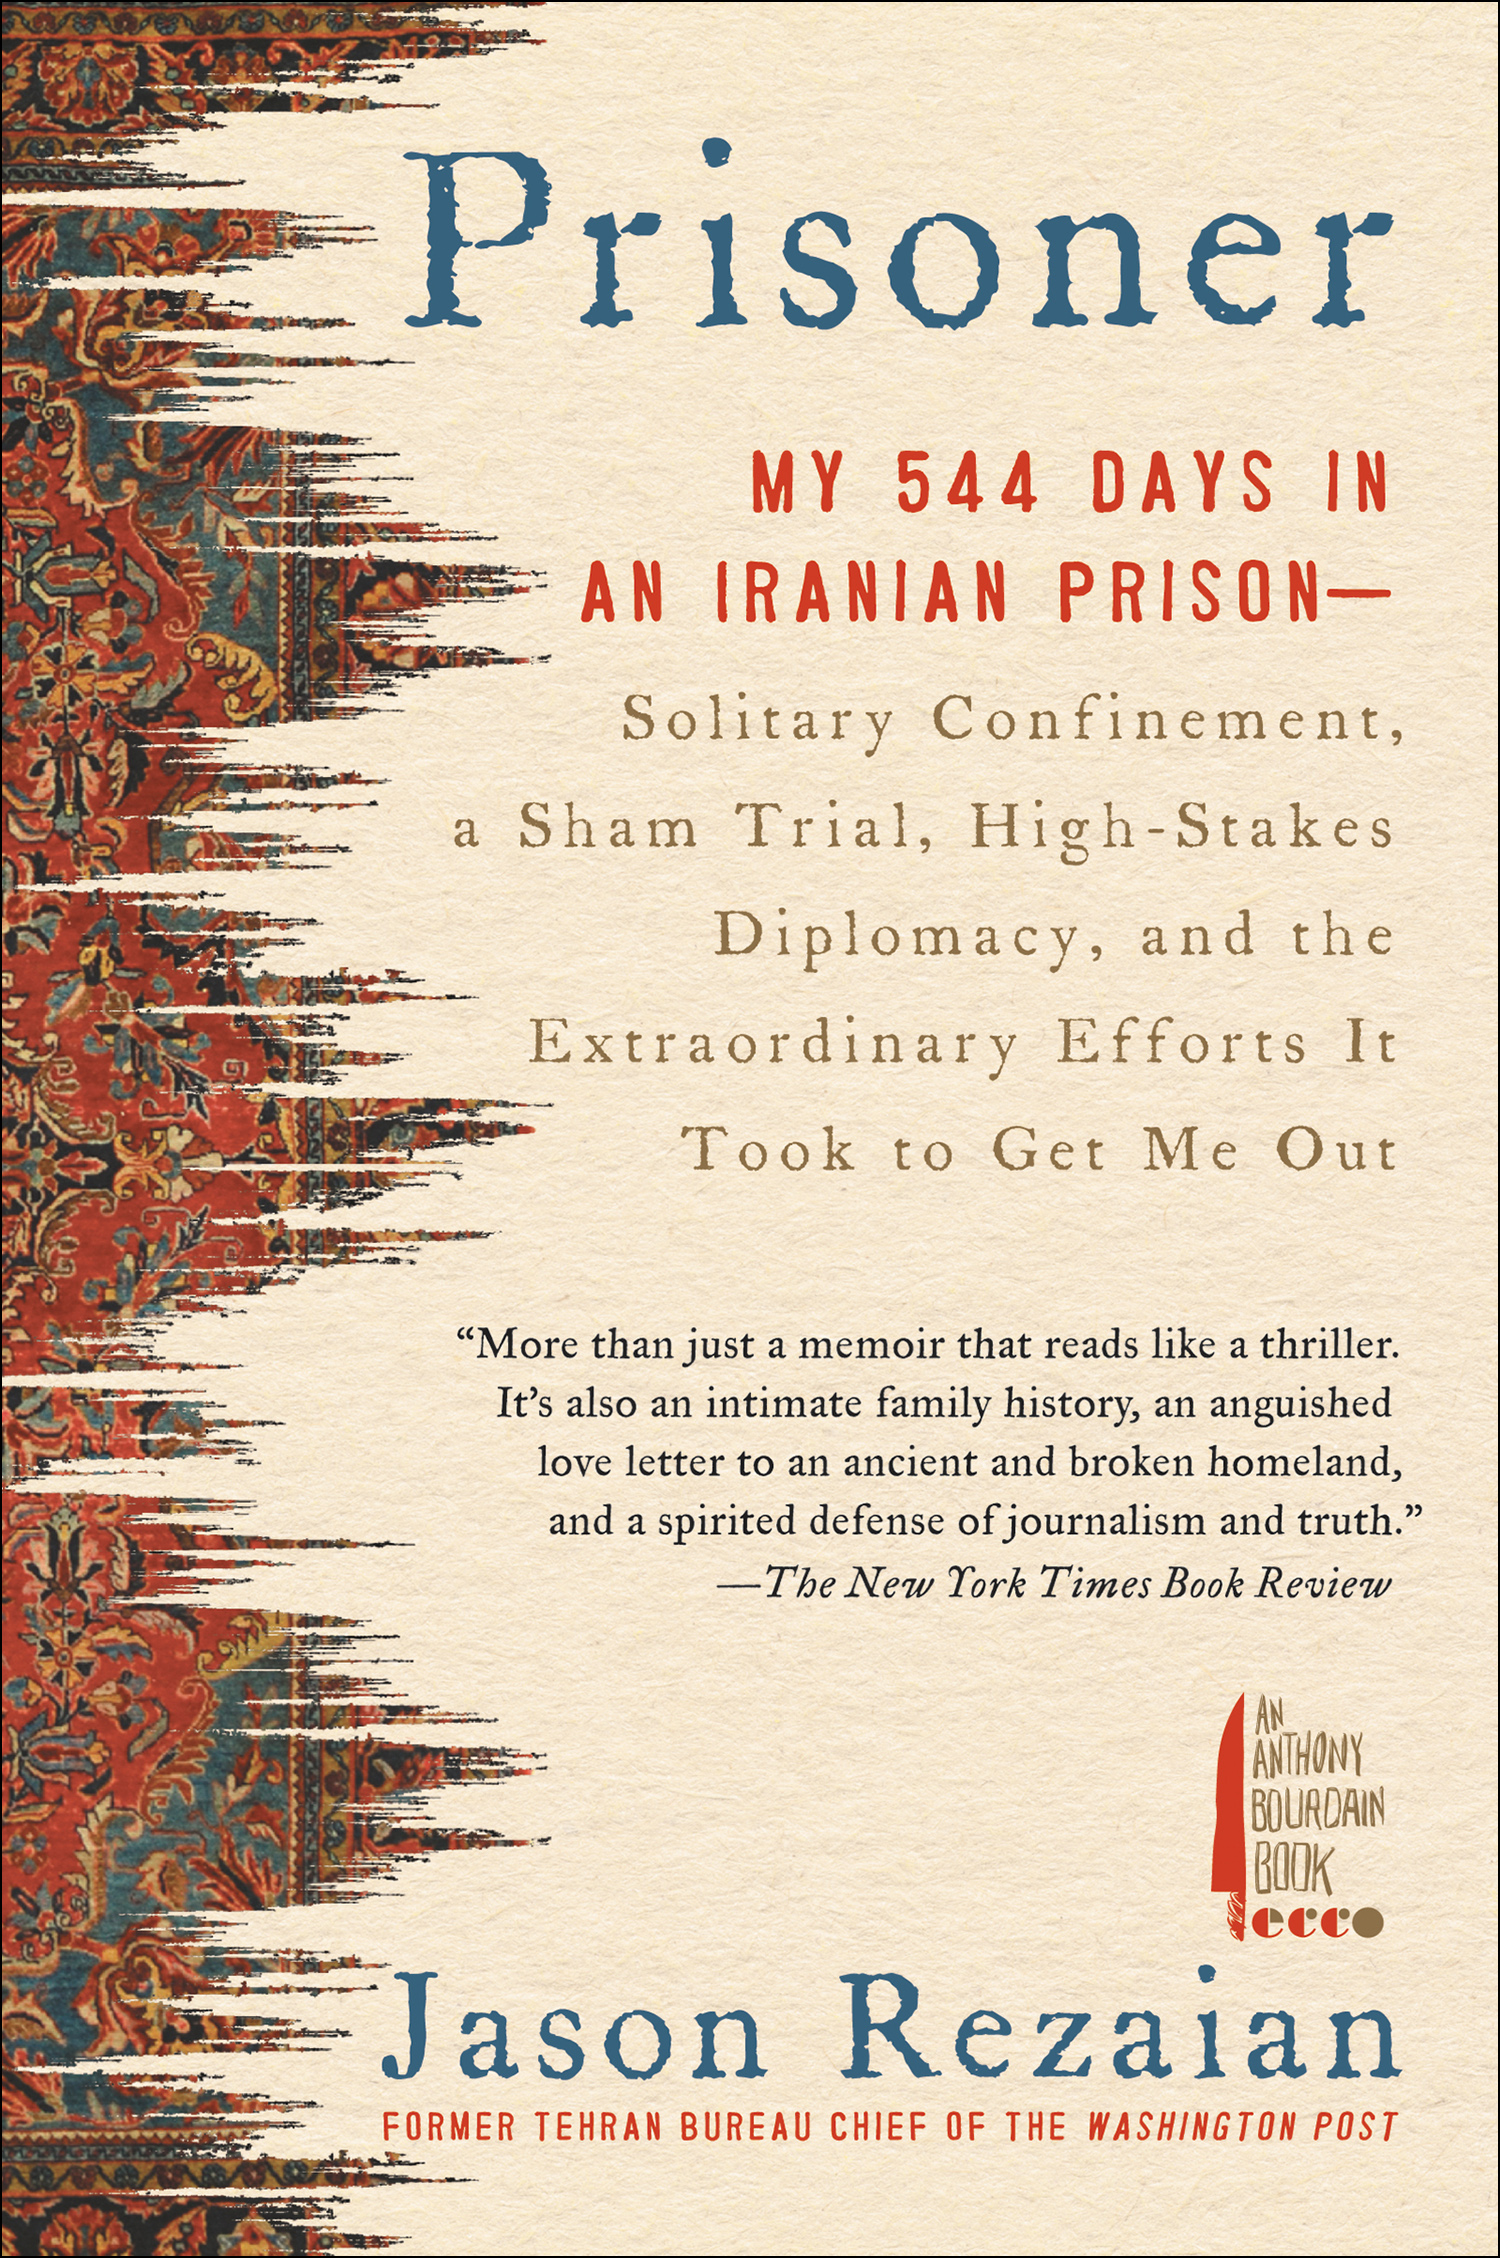 Prisoner my 544 days in an Iranian prison--solitary confinement, a sham trial, high-stakes diplomacy, and the extraordinary efforts it took to get me out cover image